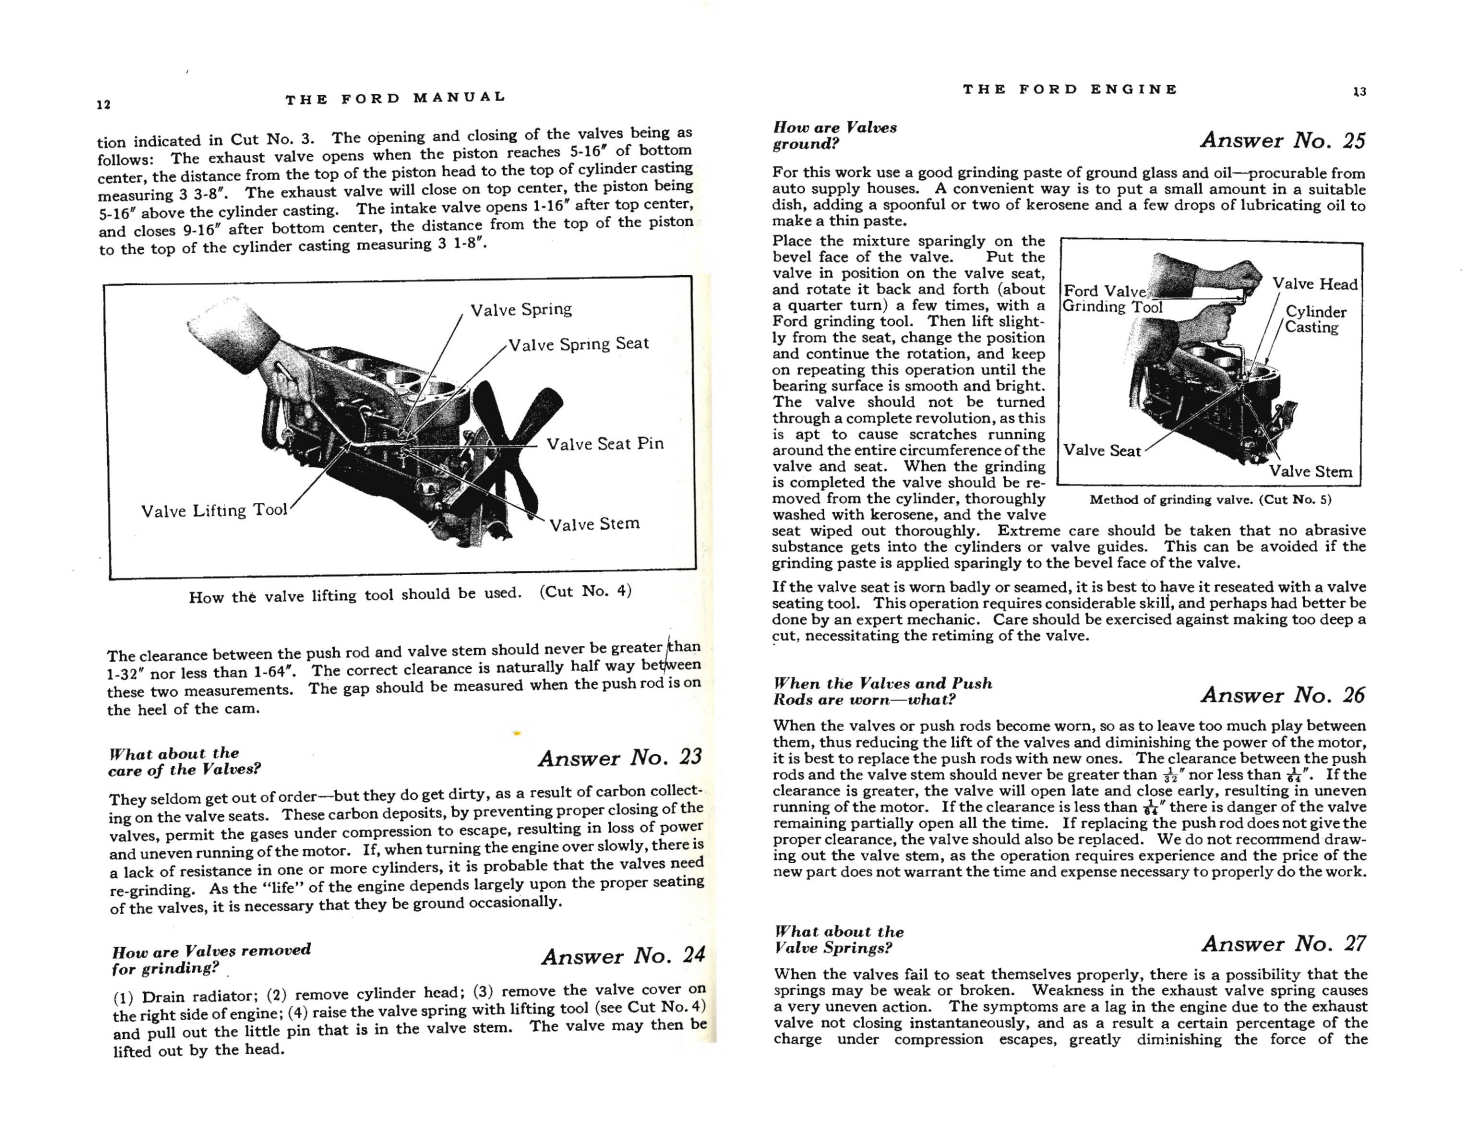 1924_Ford_Owners_Manual-12-13